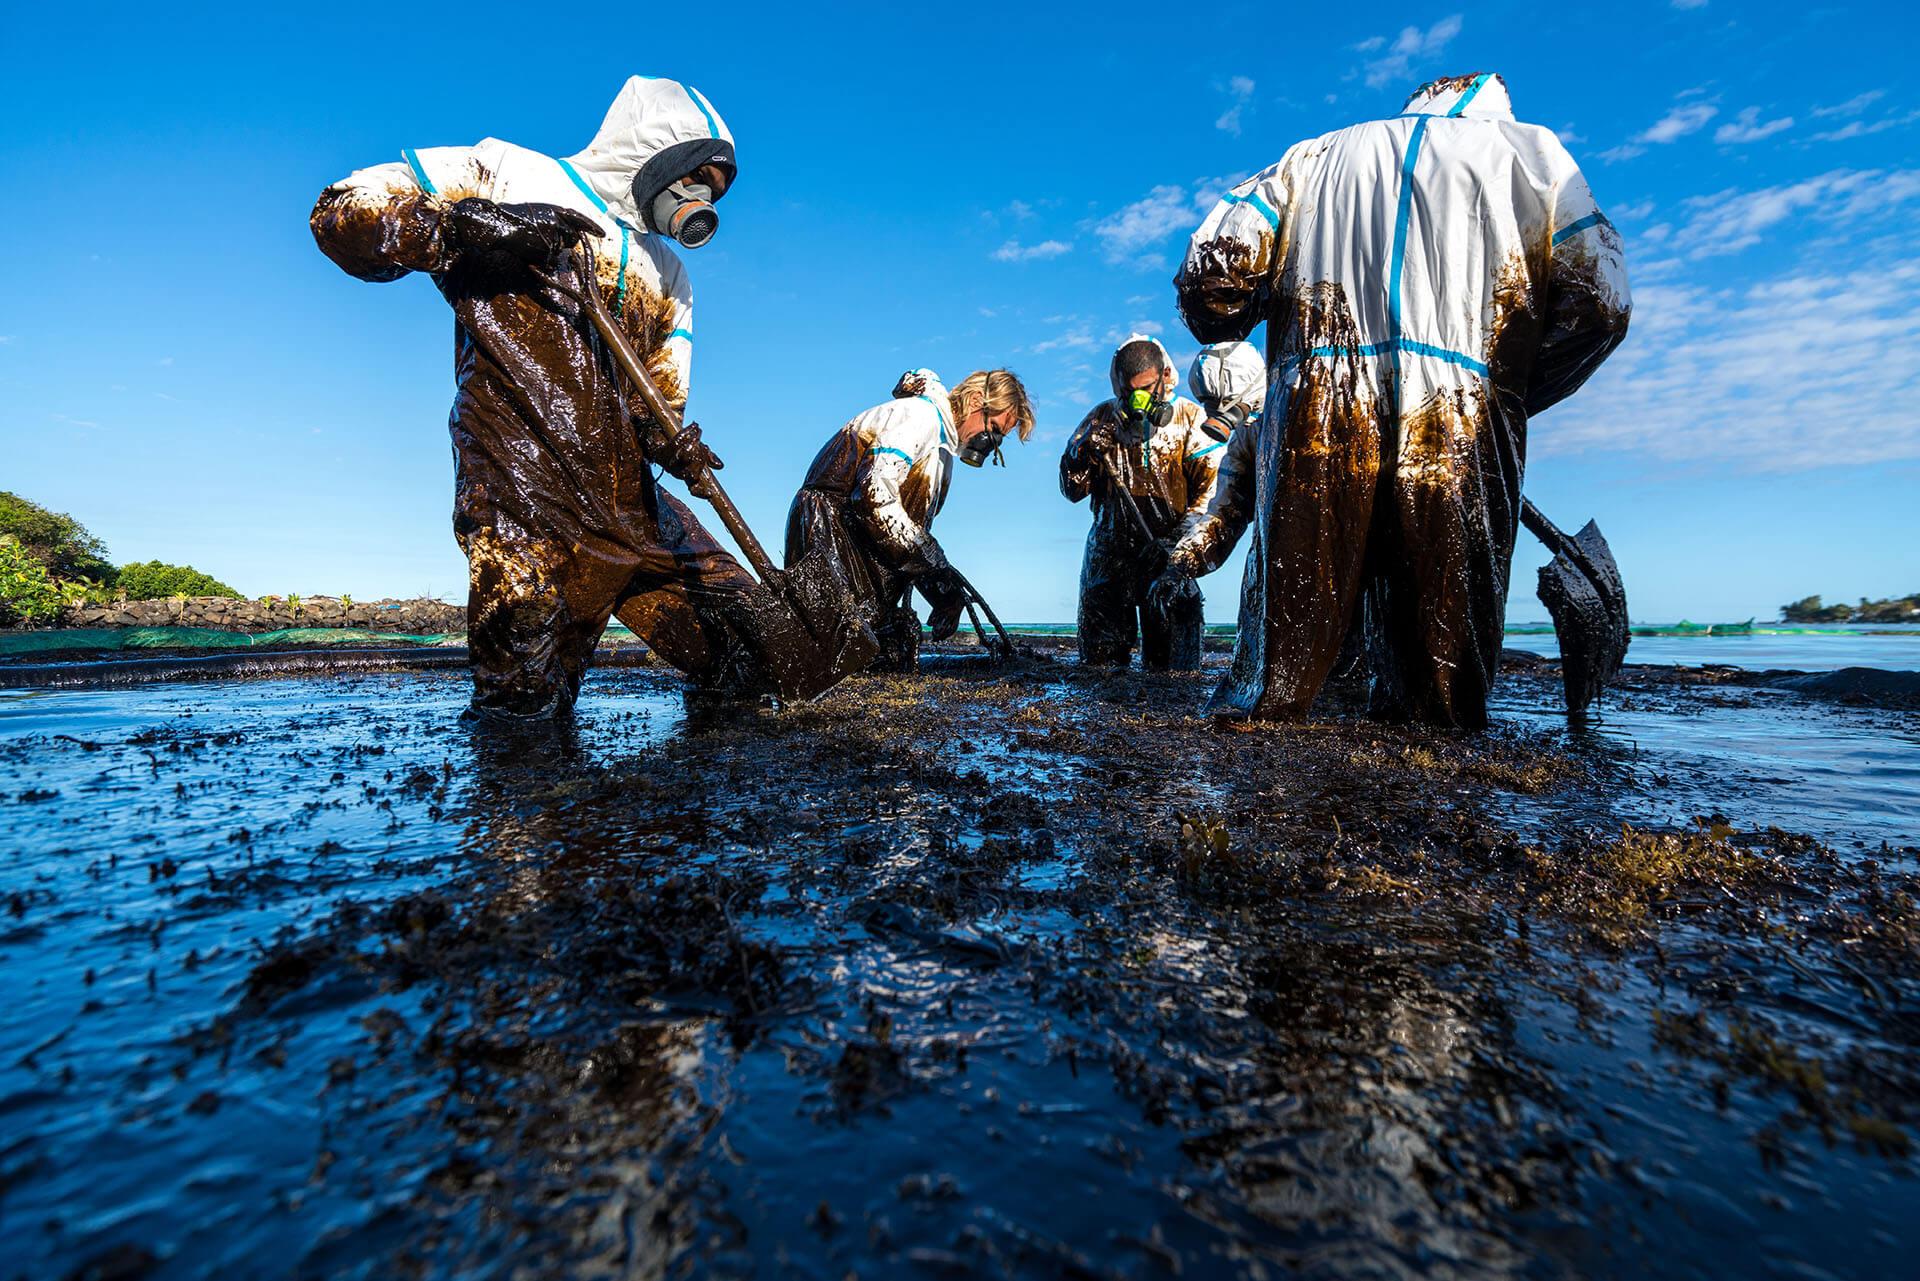 Oil spill clean up with HAZWOPER-certified workers